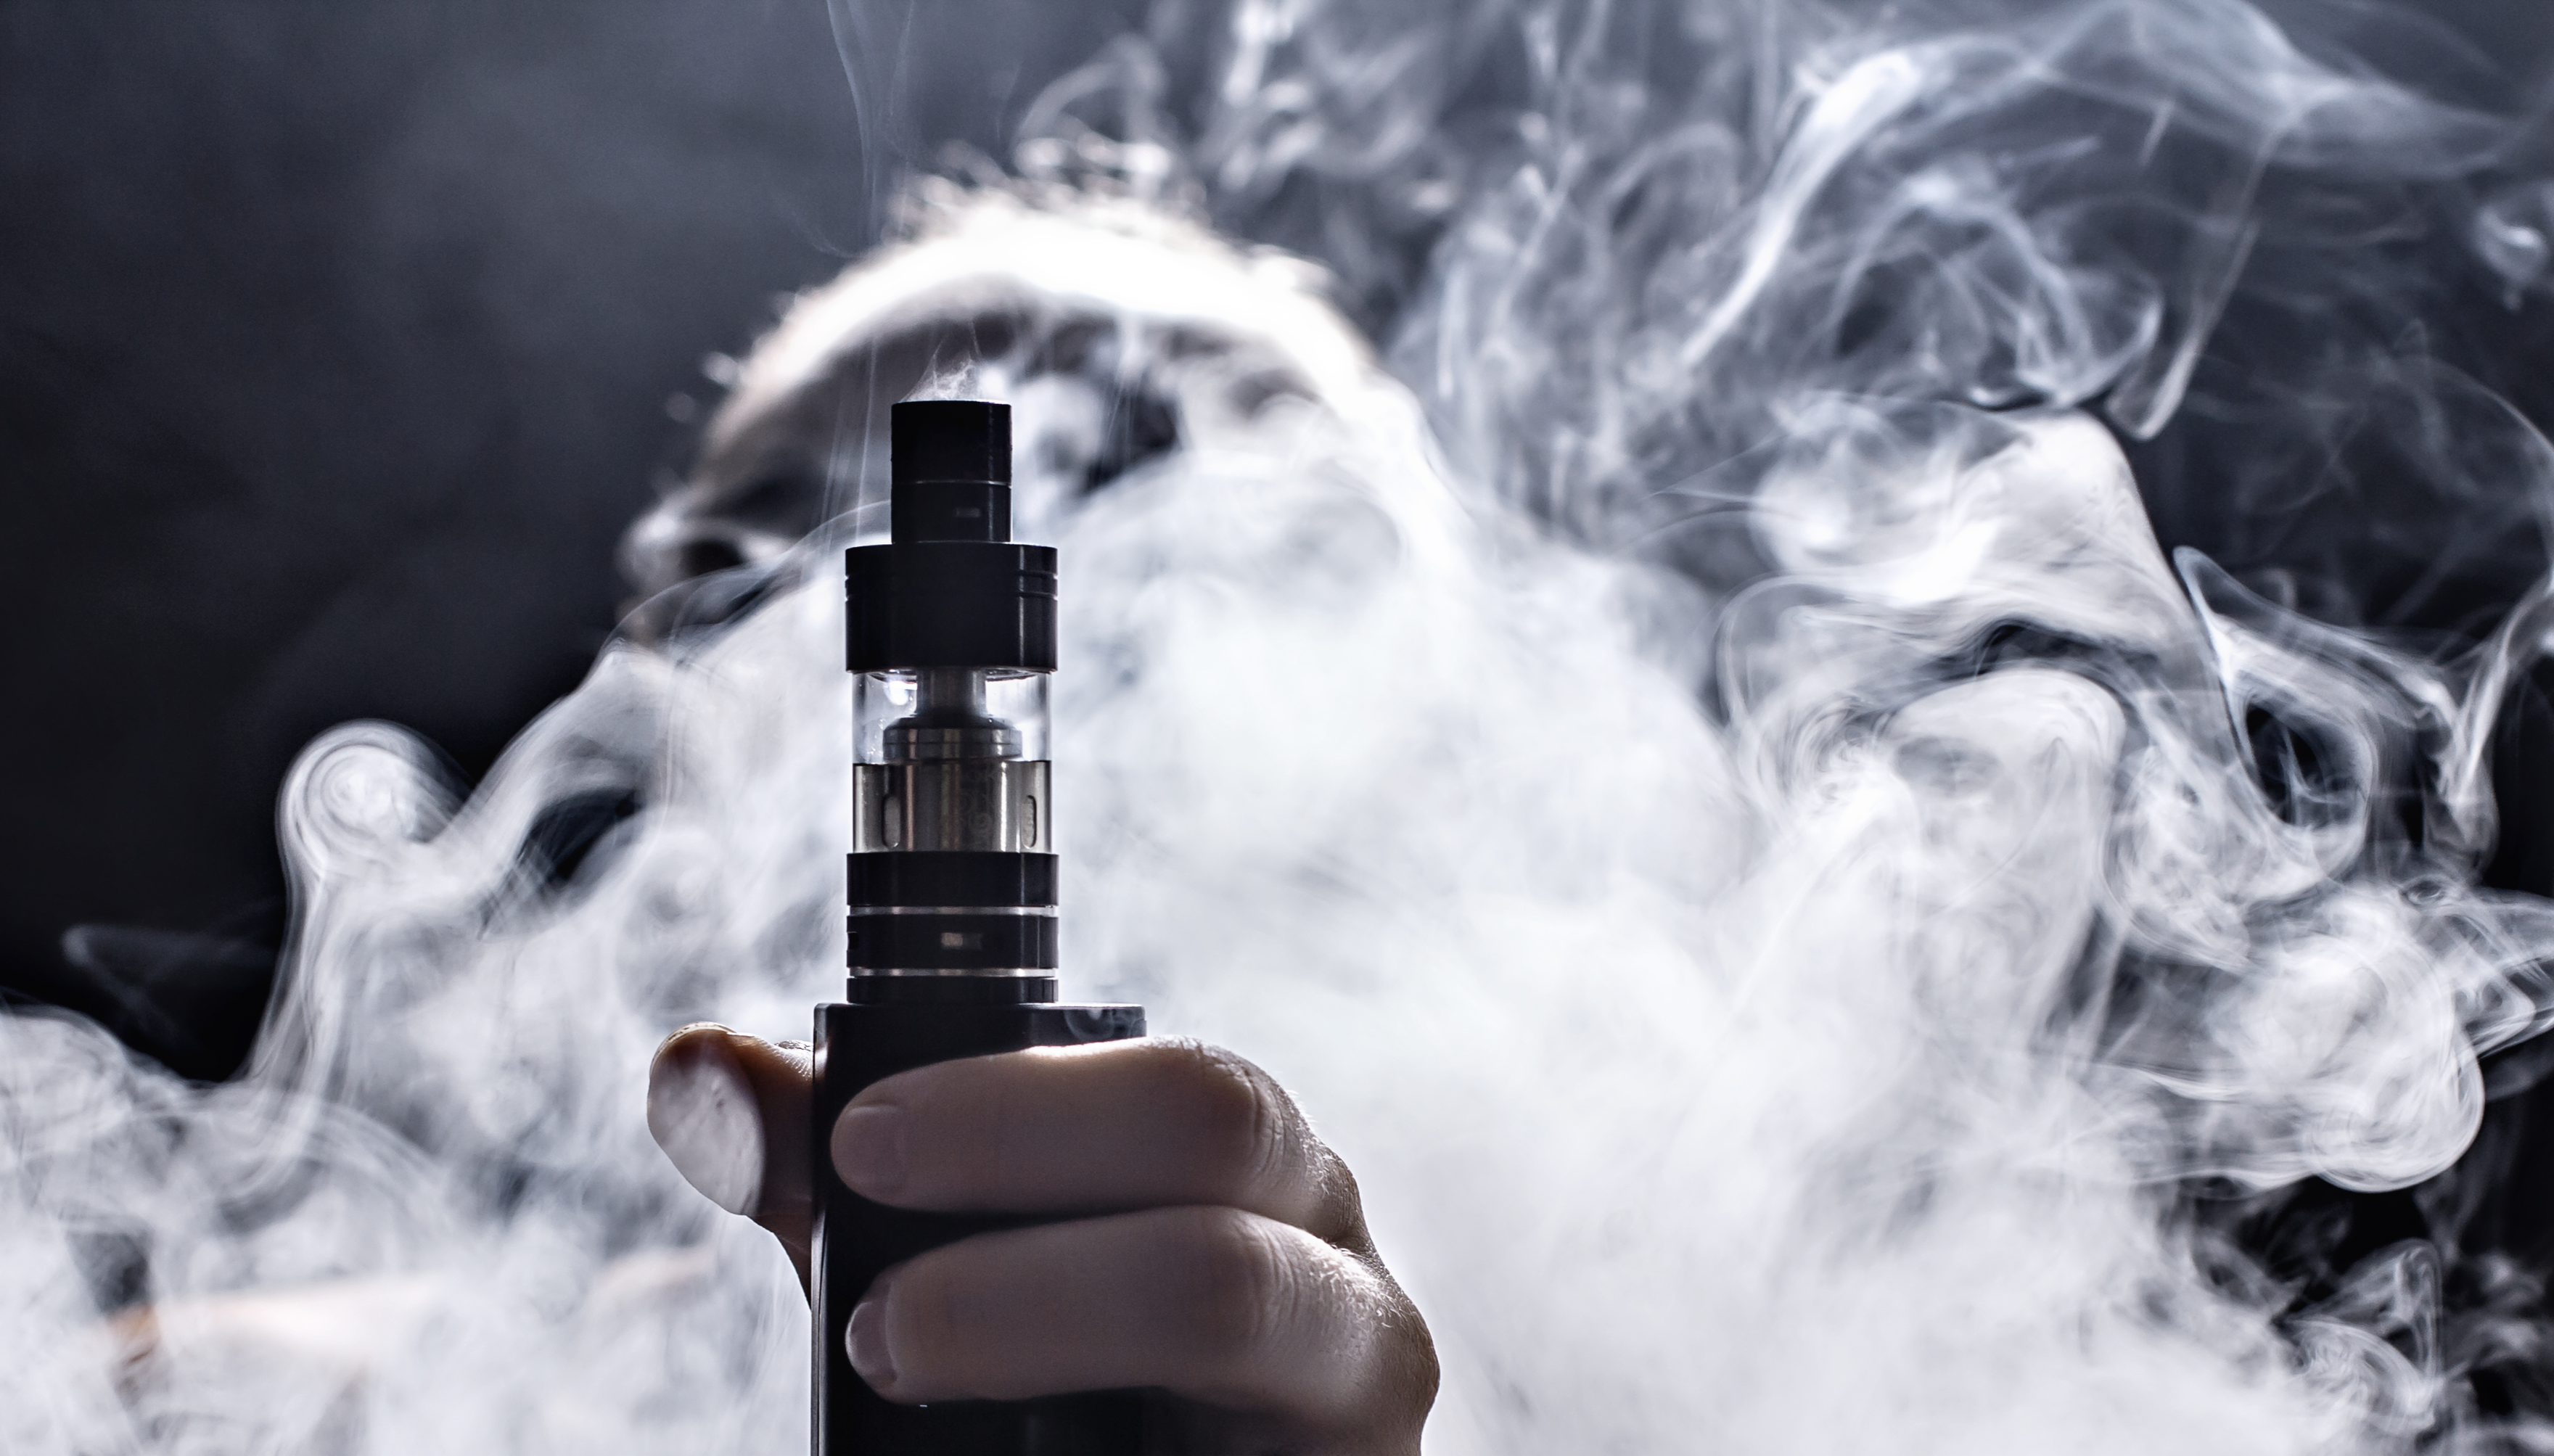 Vaping Dangers: What's Causing All The Deaths?